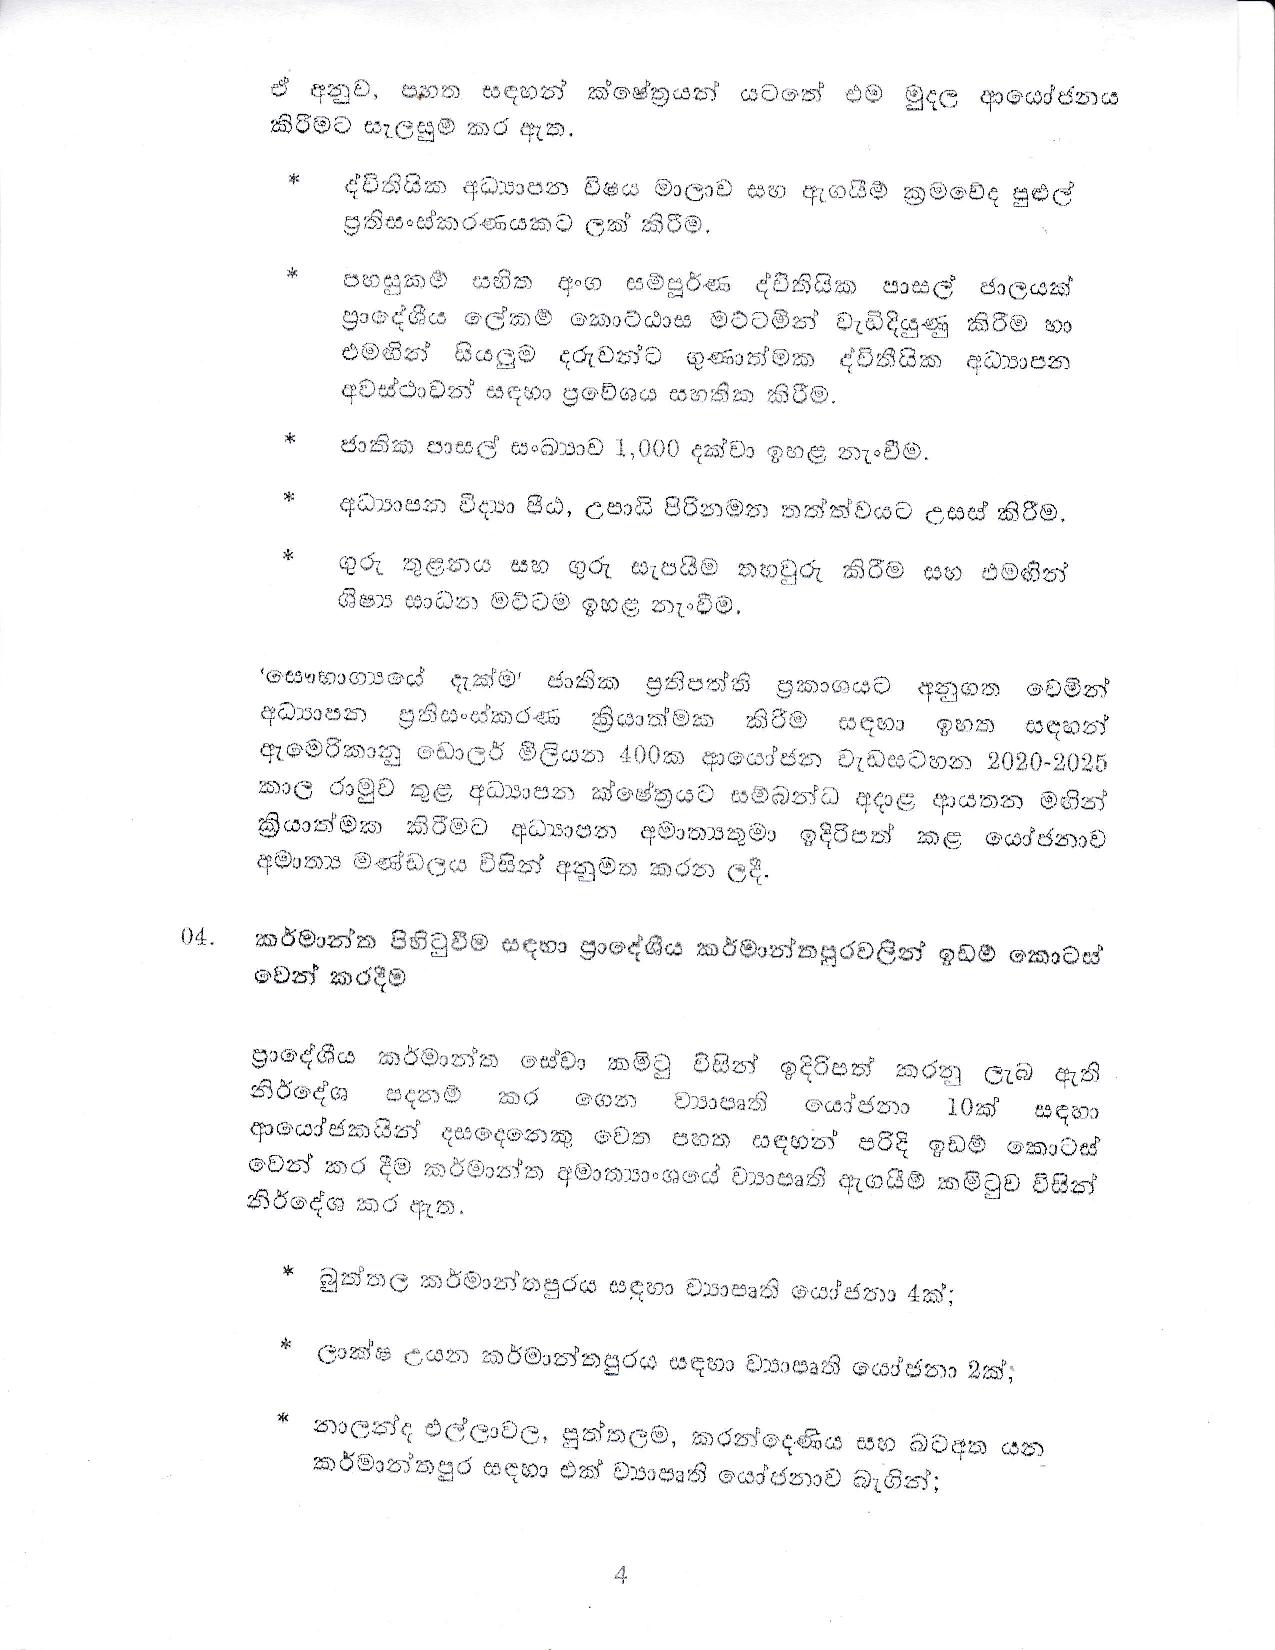 Cabinet Decision on 05.10.2020 page 004